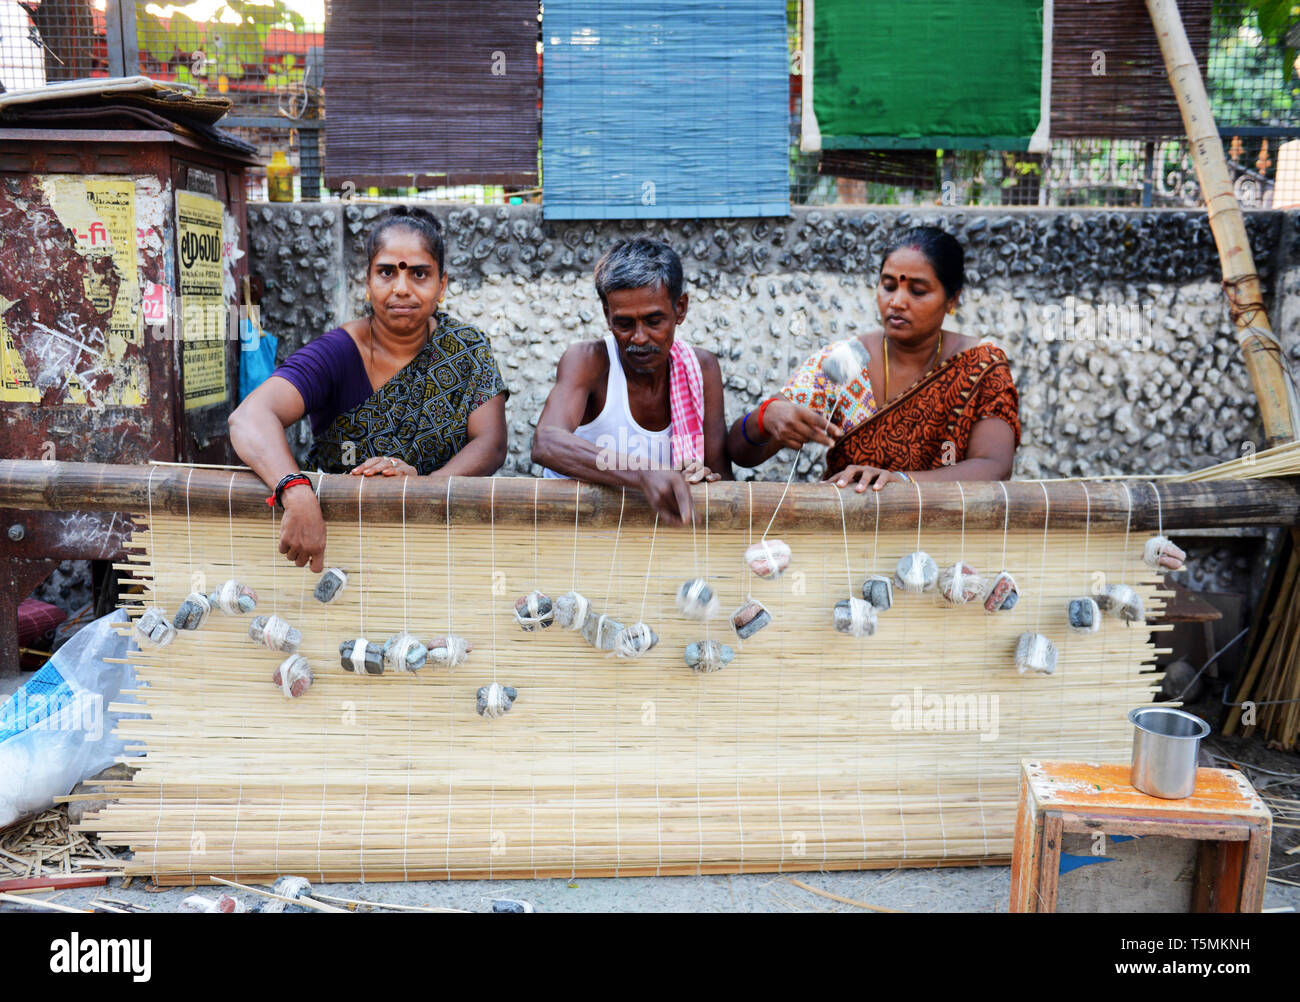 Tamil men and women working on a new bamboo curtain in the streets of Chennai. Stock Photo